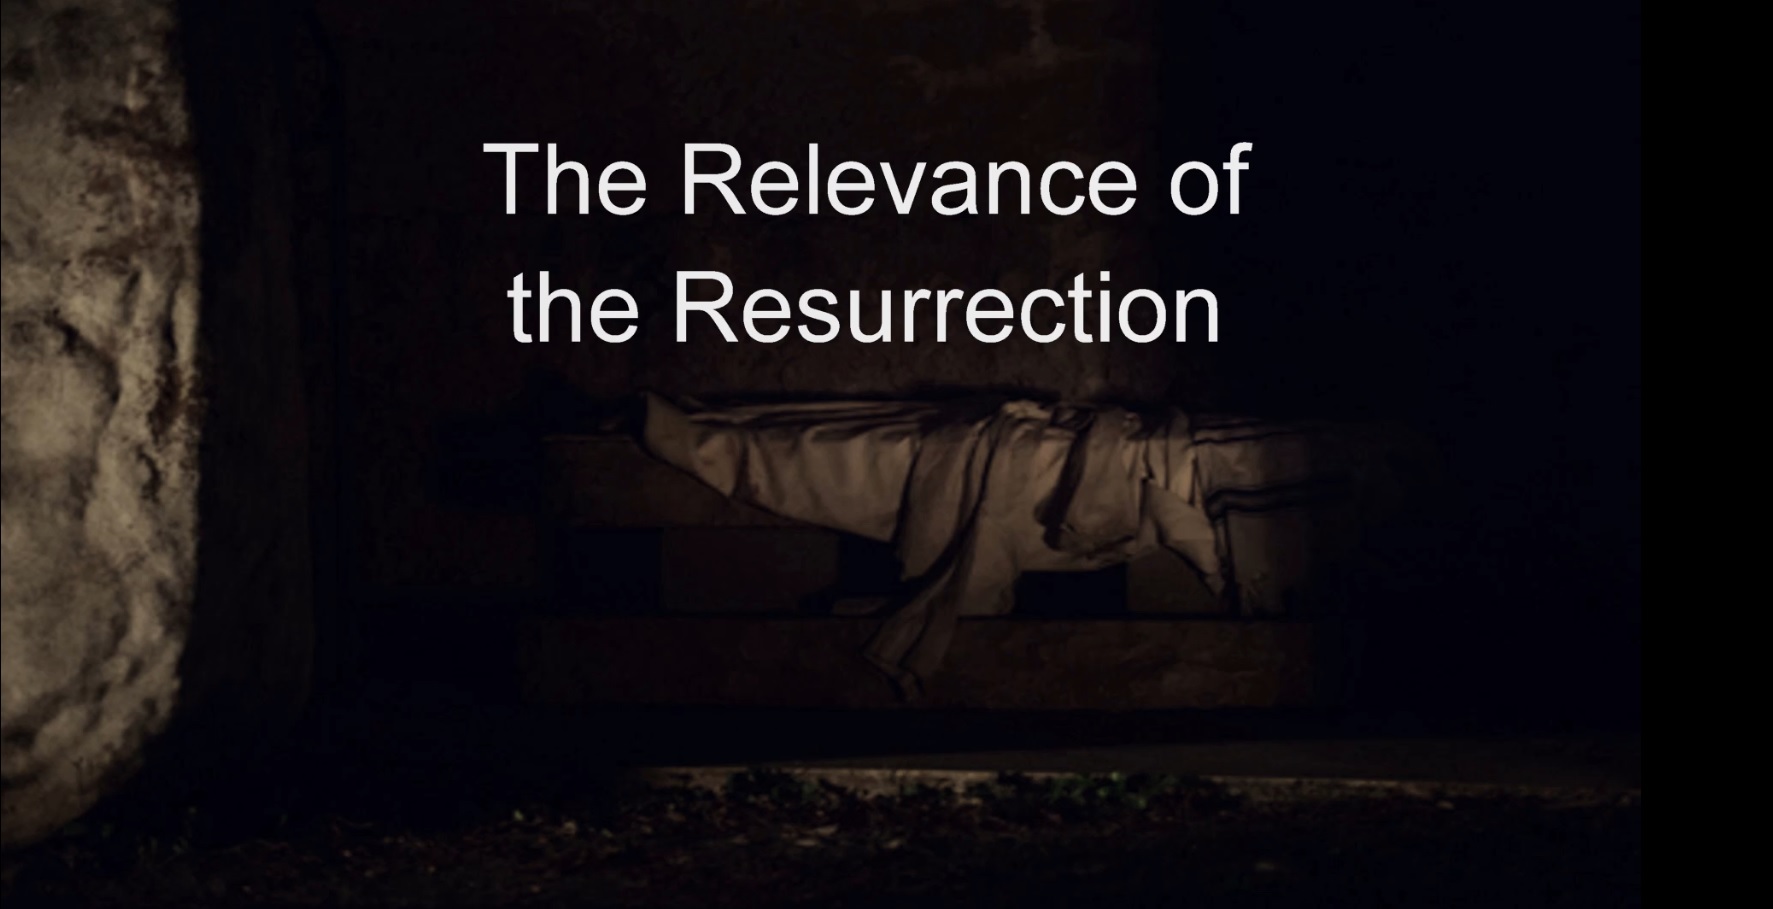 The Relevance of the Resurrection